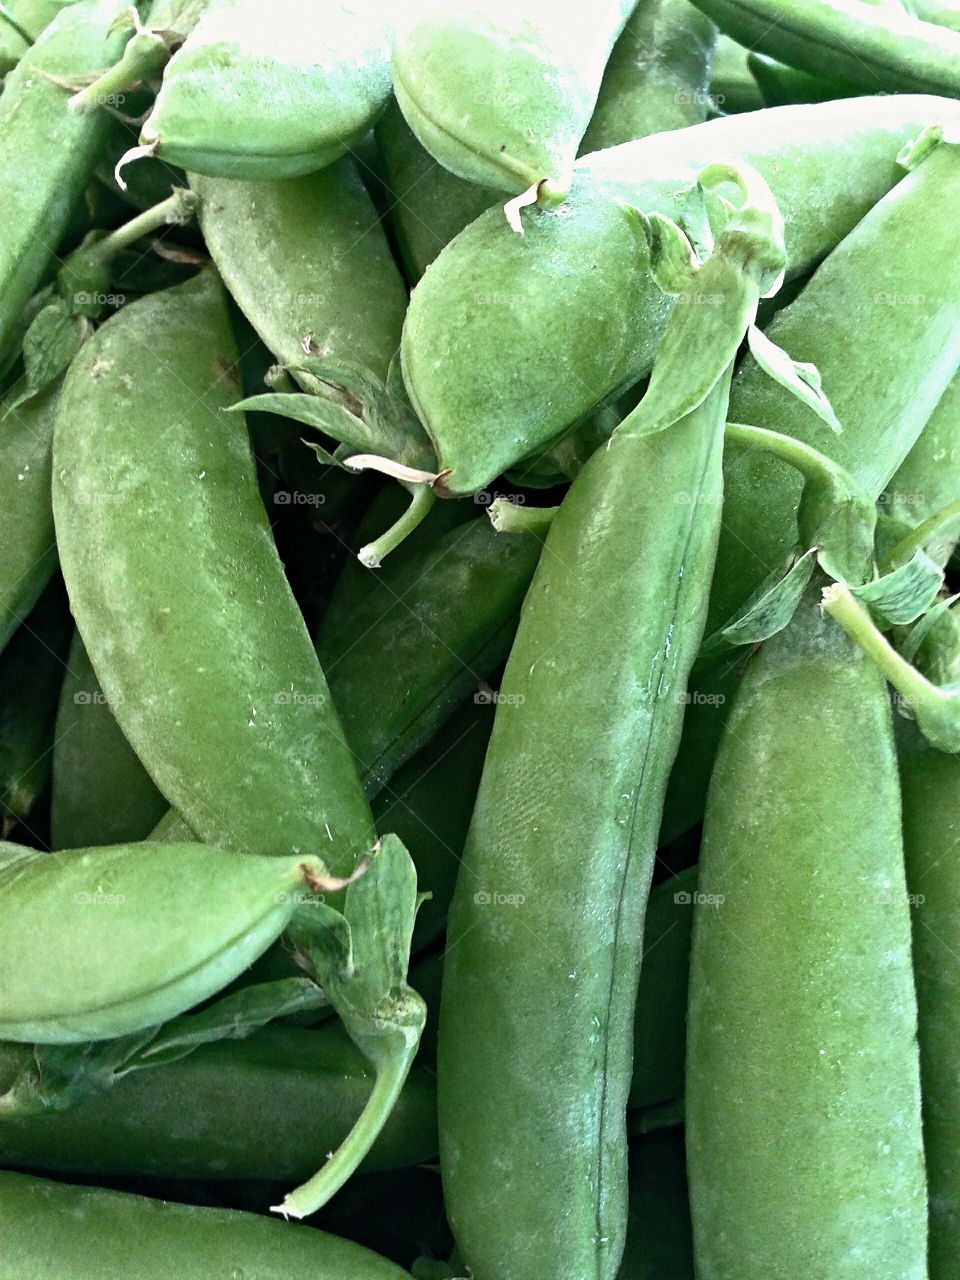 Sugar peas. So pretty and green. Not to mention delicious as well.